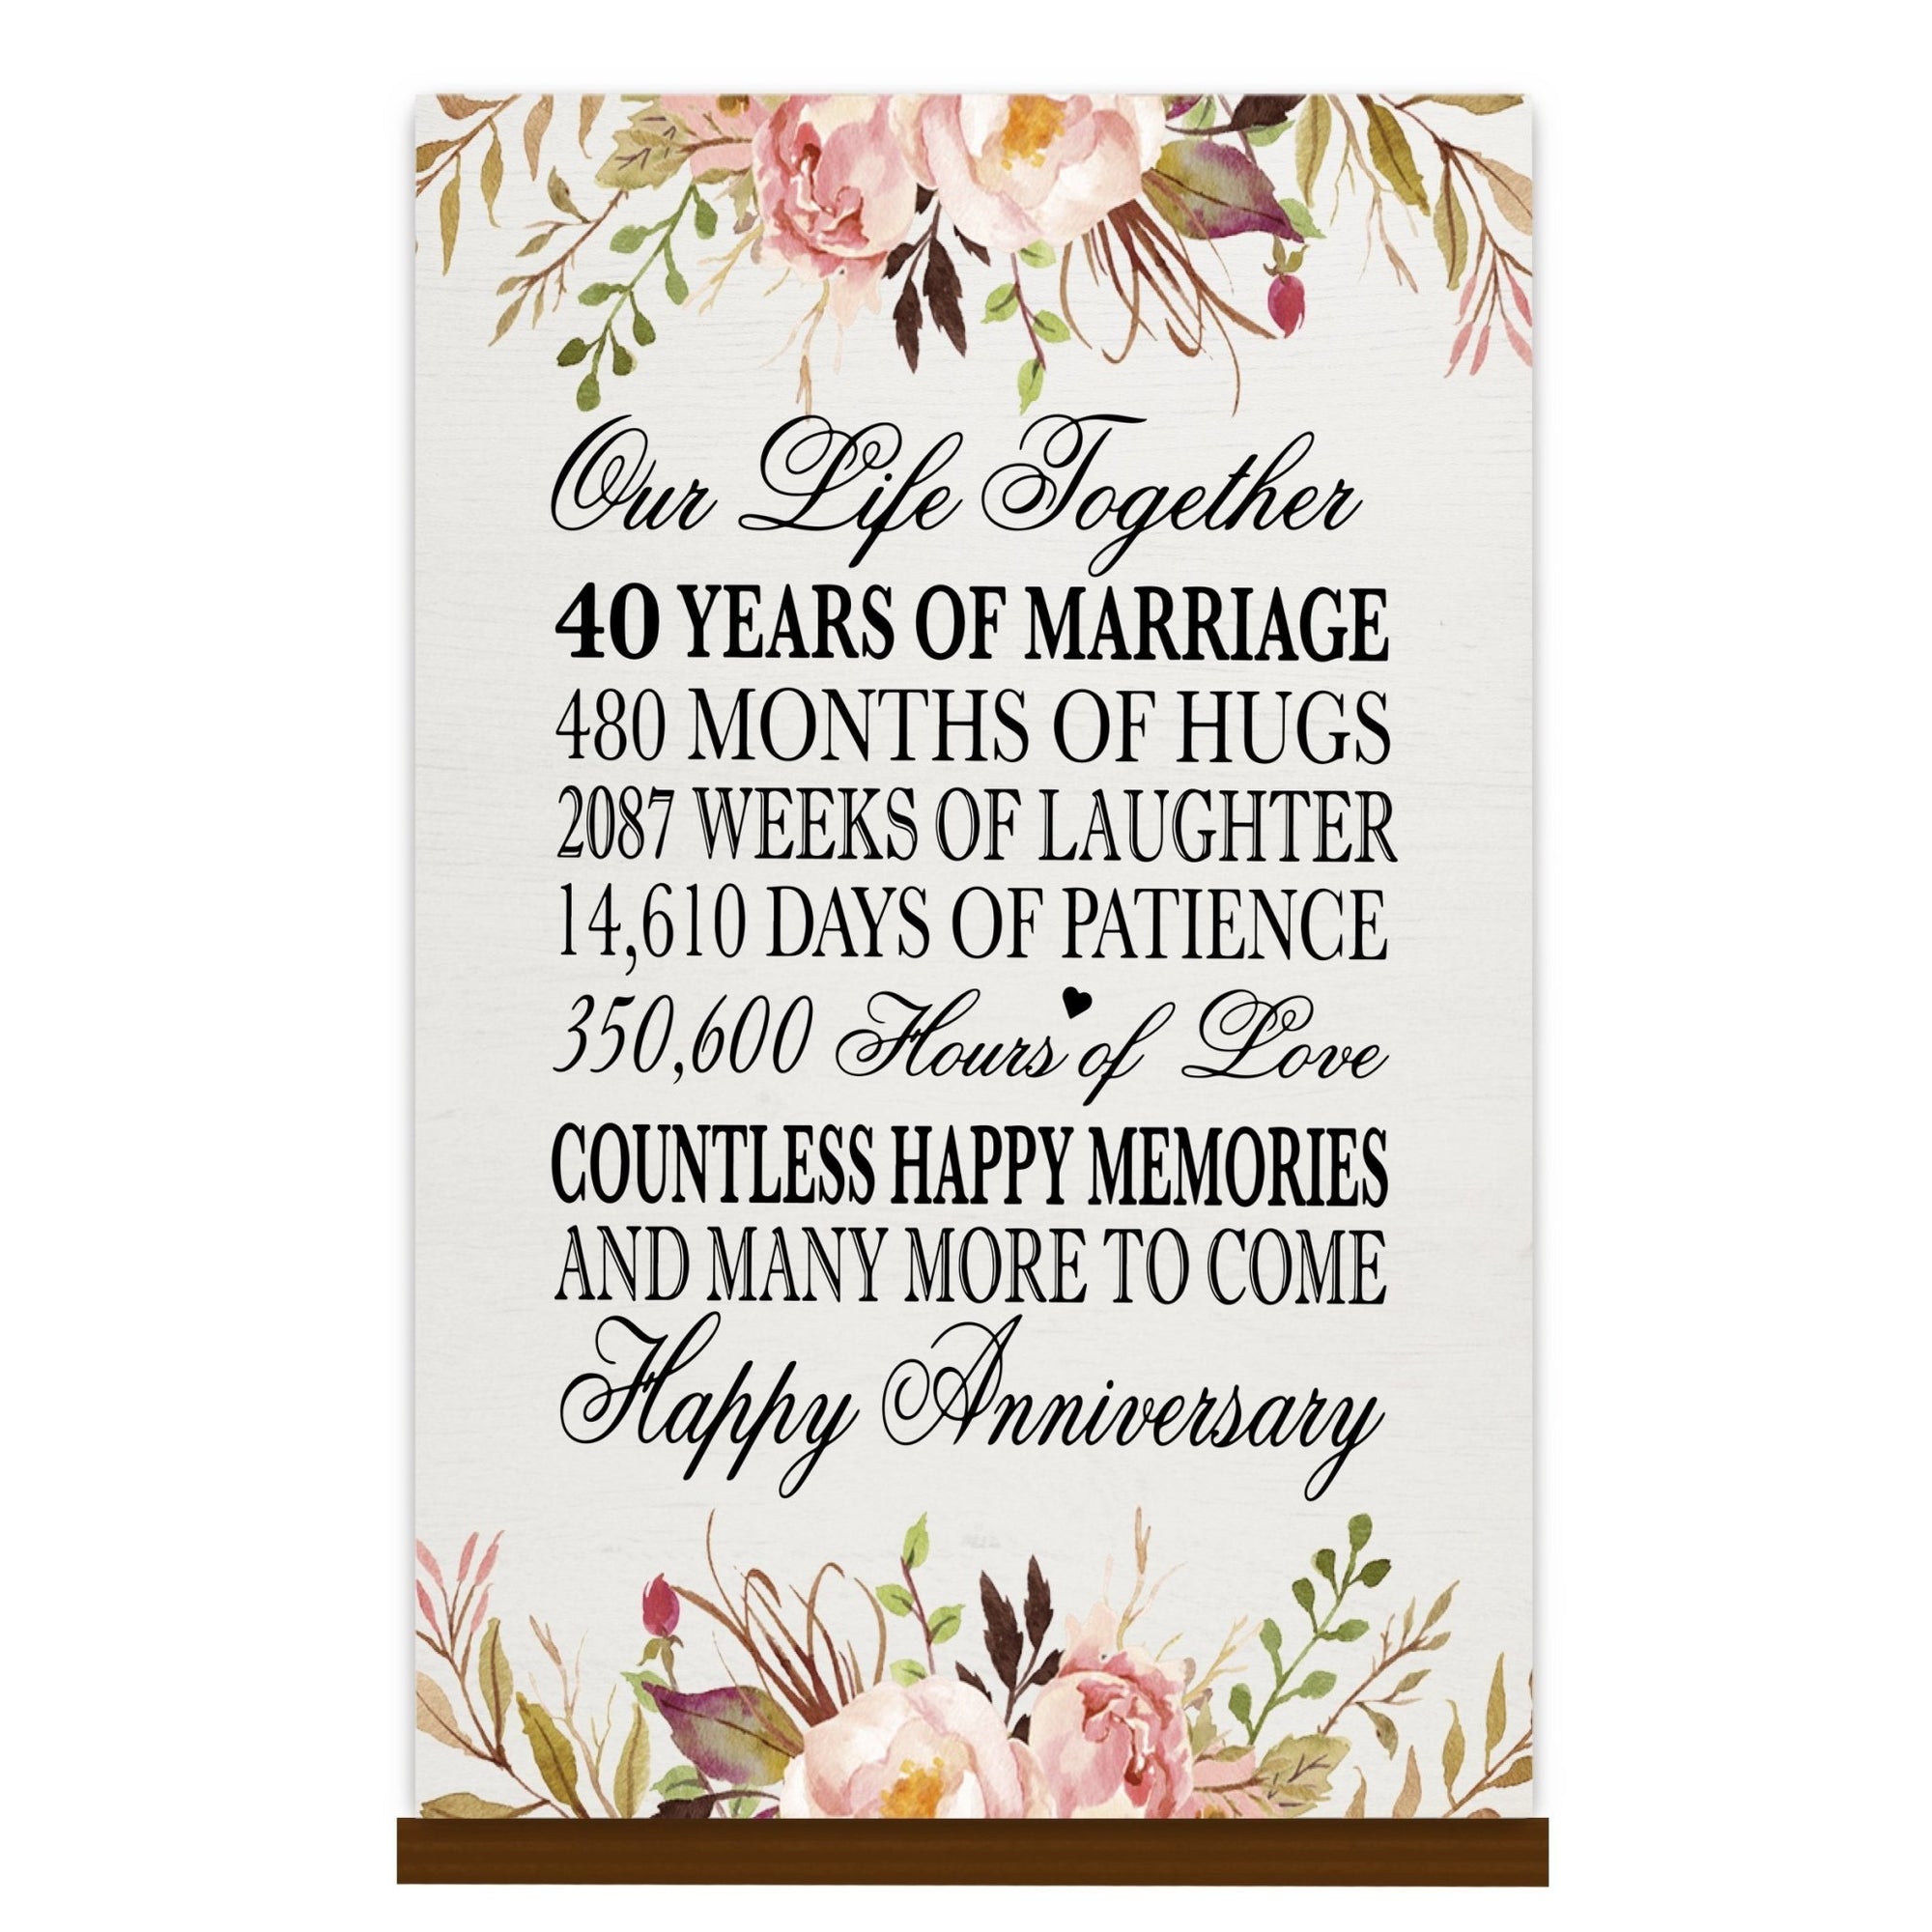 LifeSong Milestones 40th Anniversary Wall Plaque for Couples